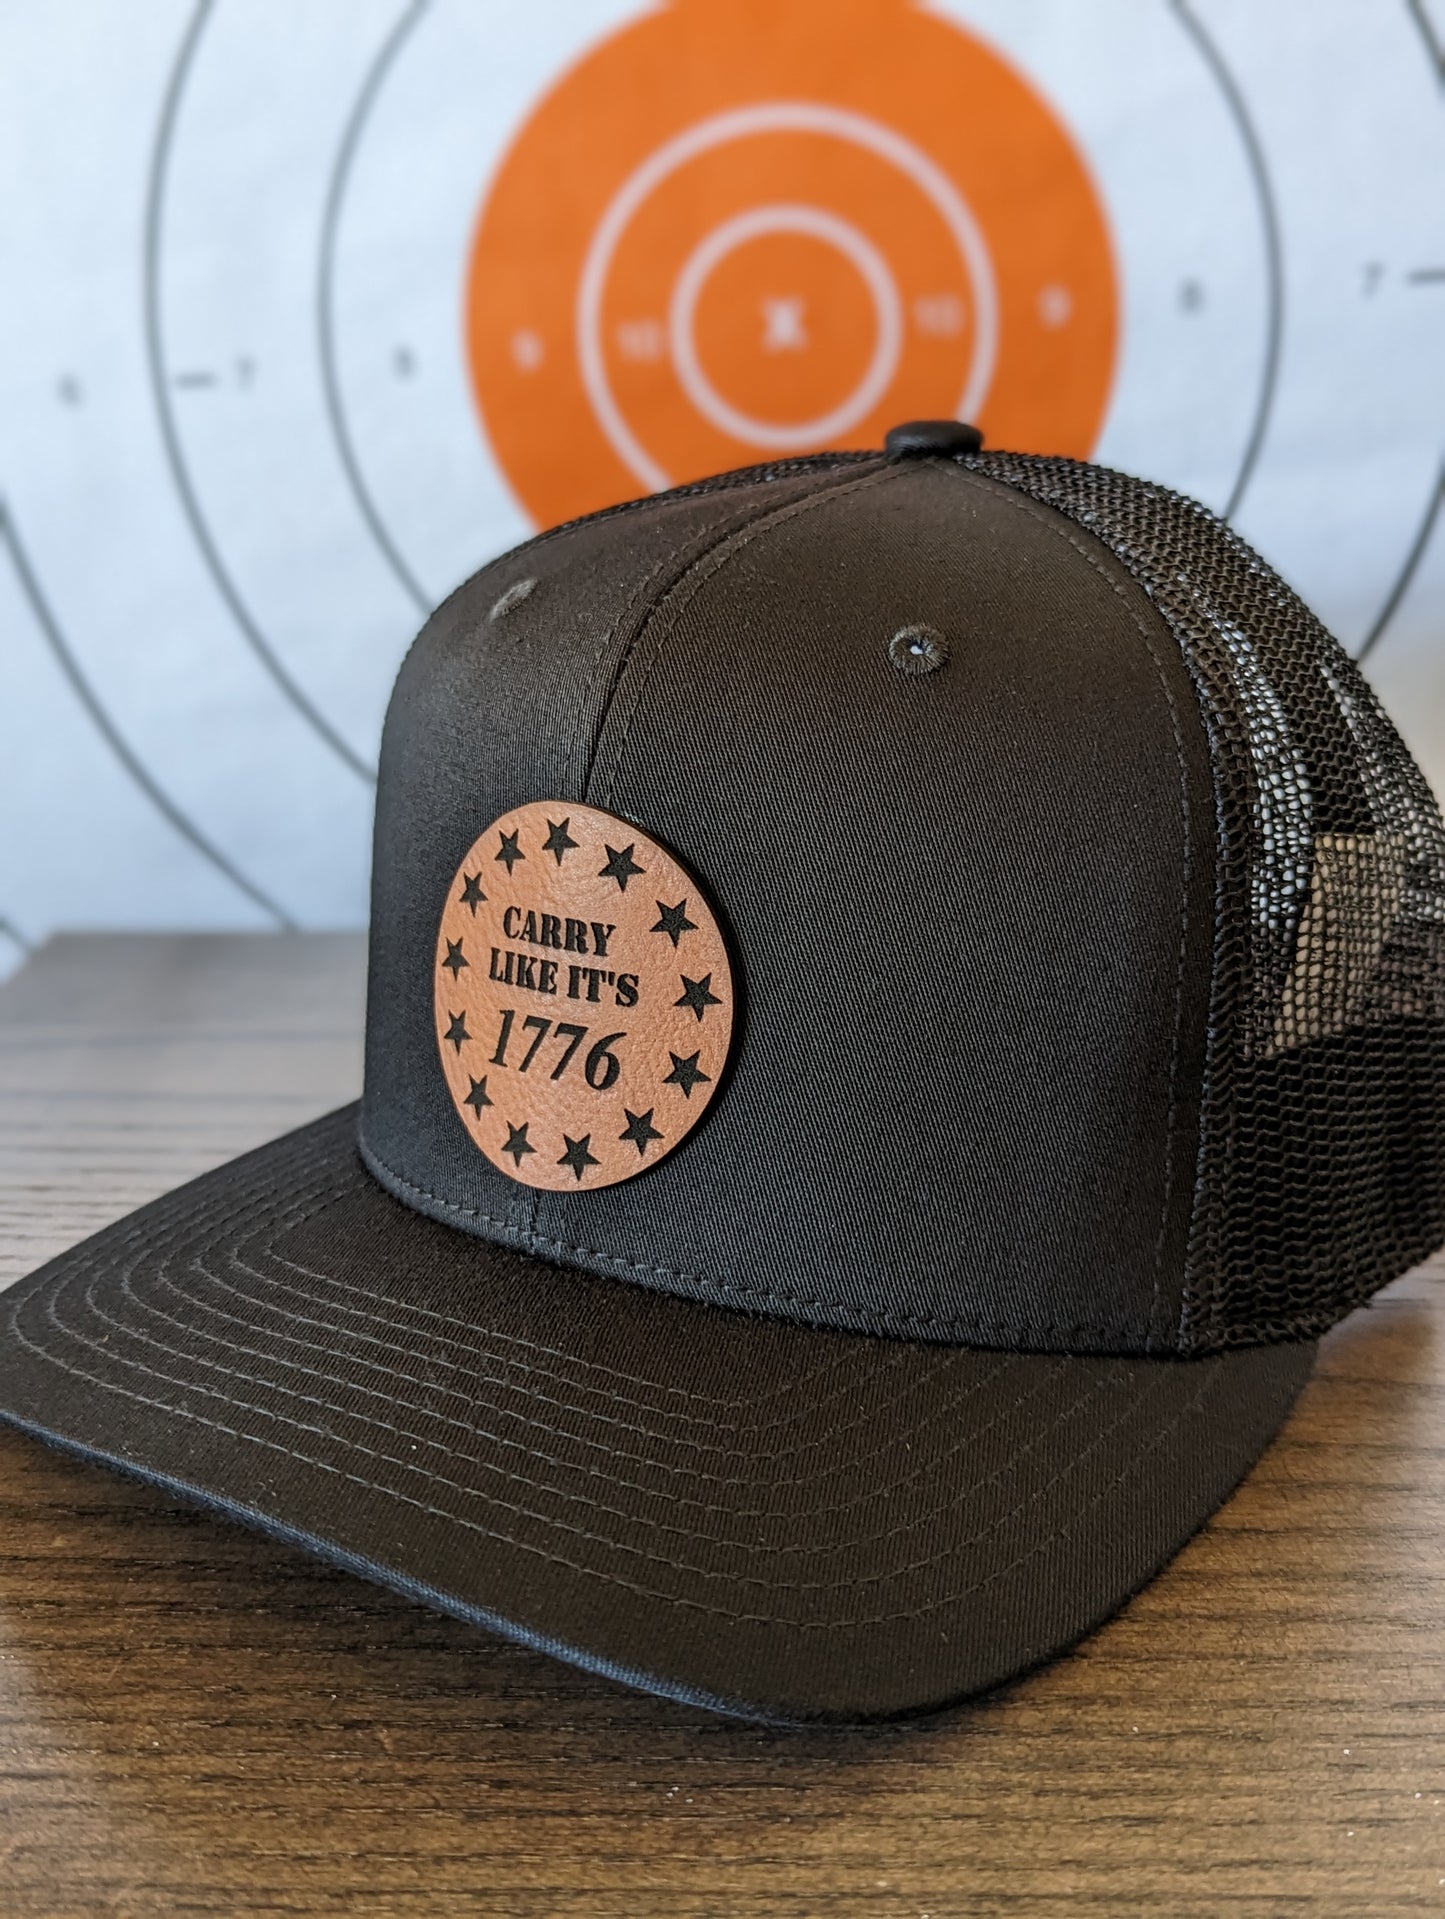 Carry Like its 1776 - Black Truckers Hat